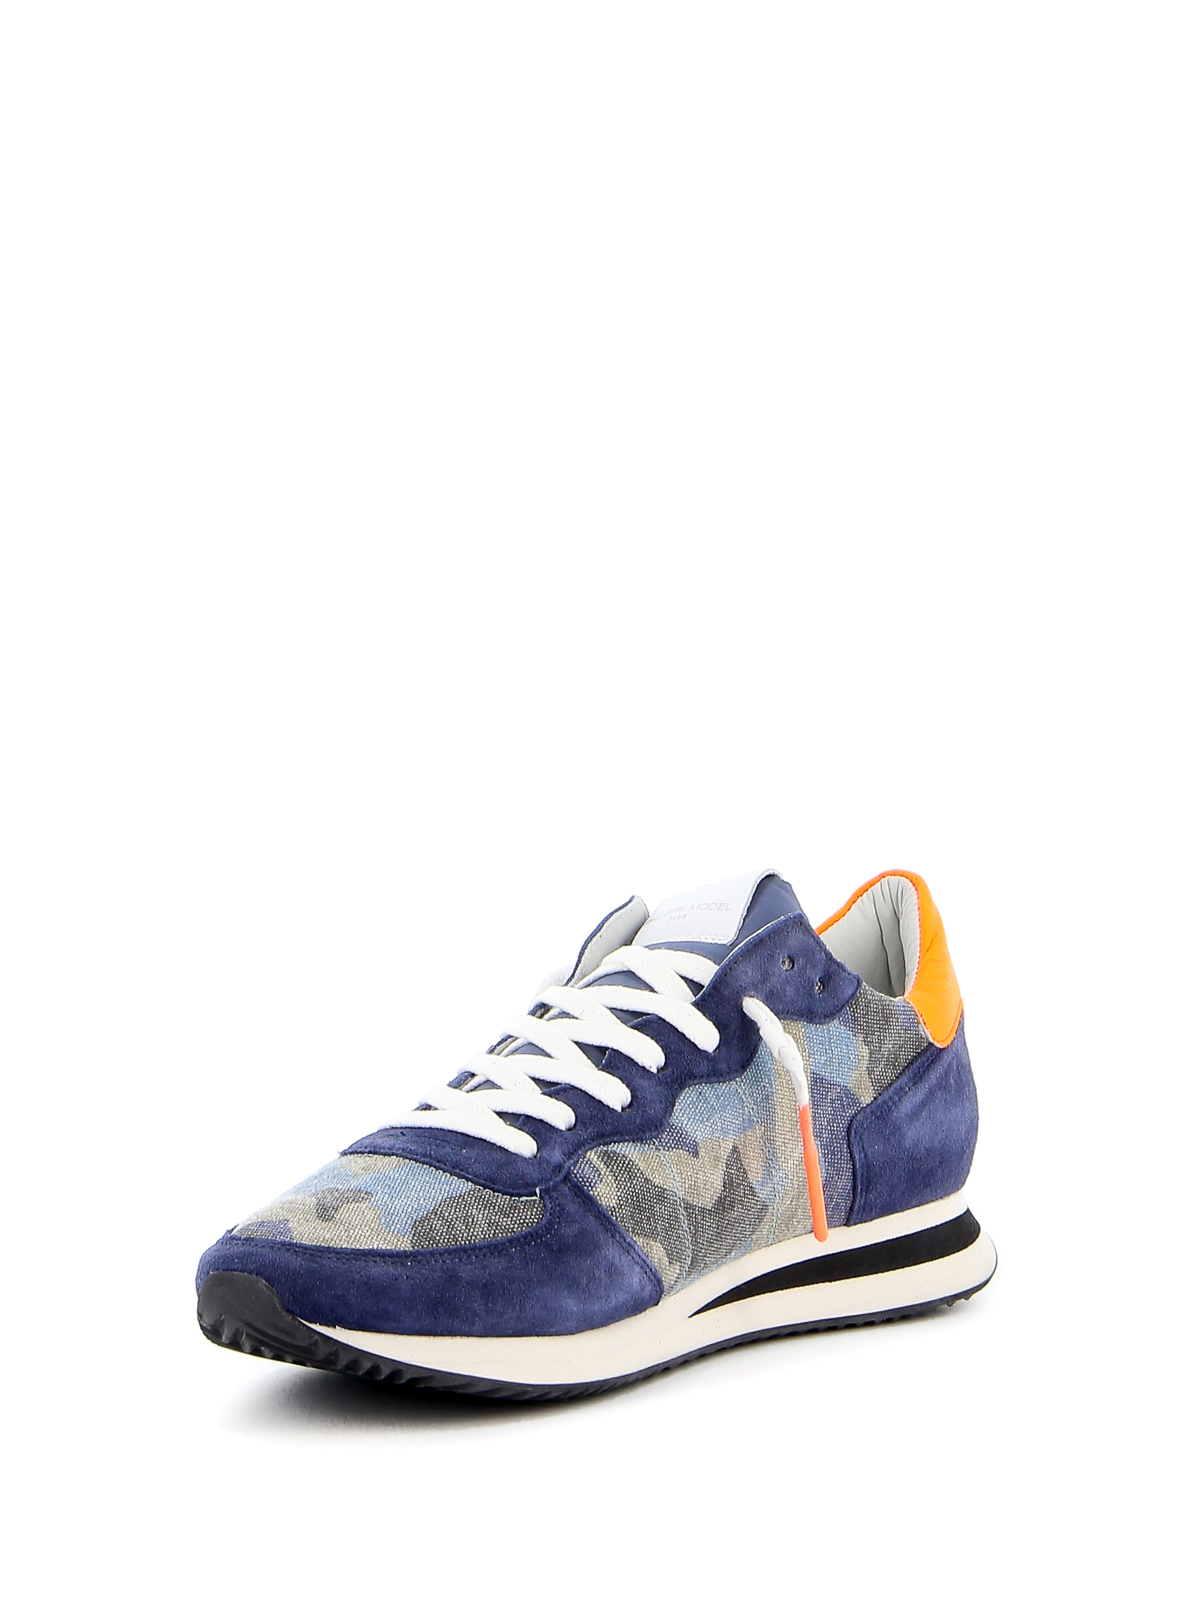 Trpx camouflage sneakers